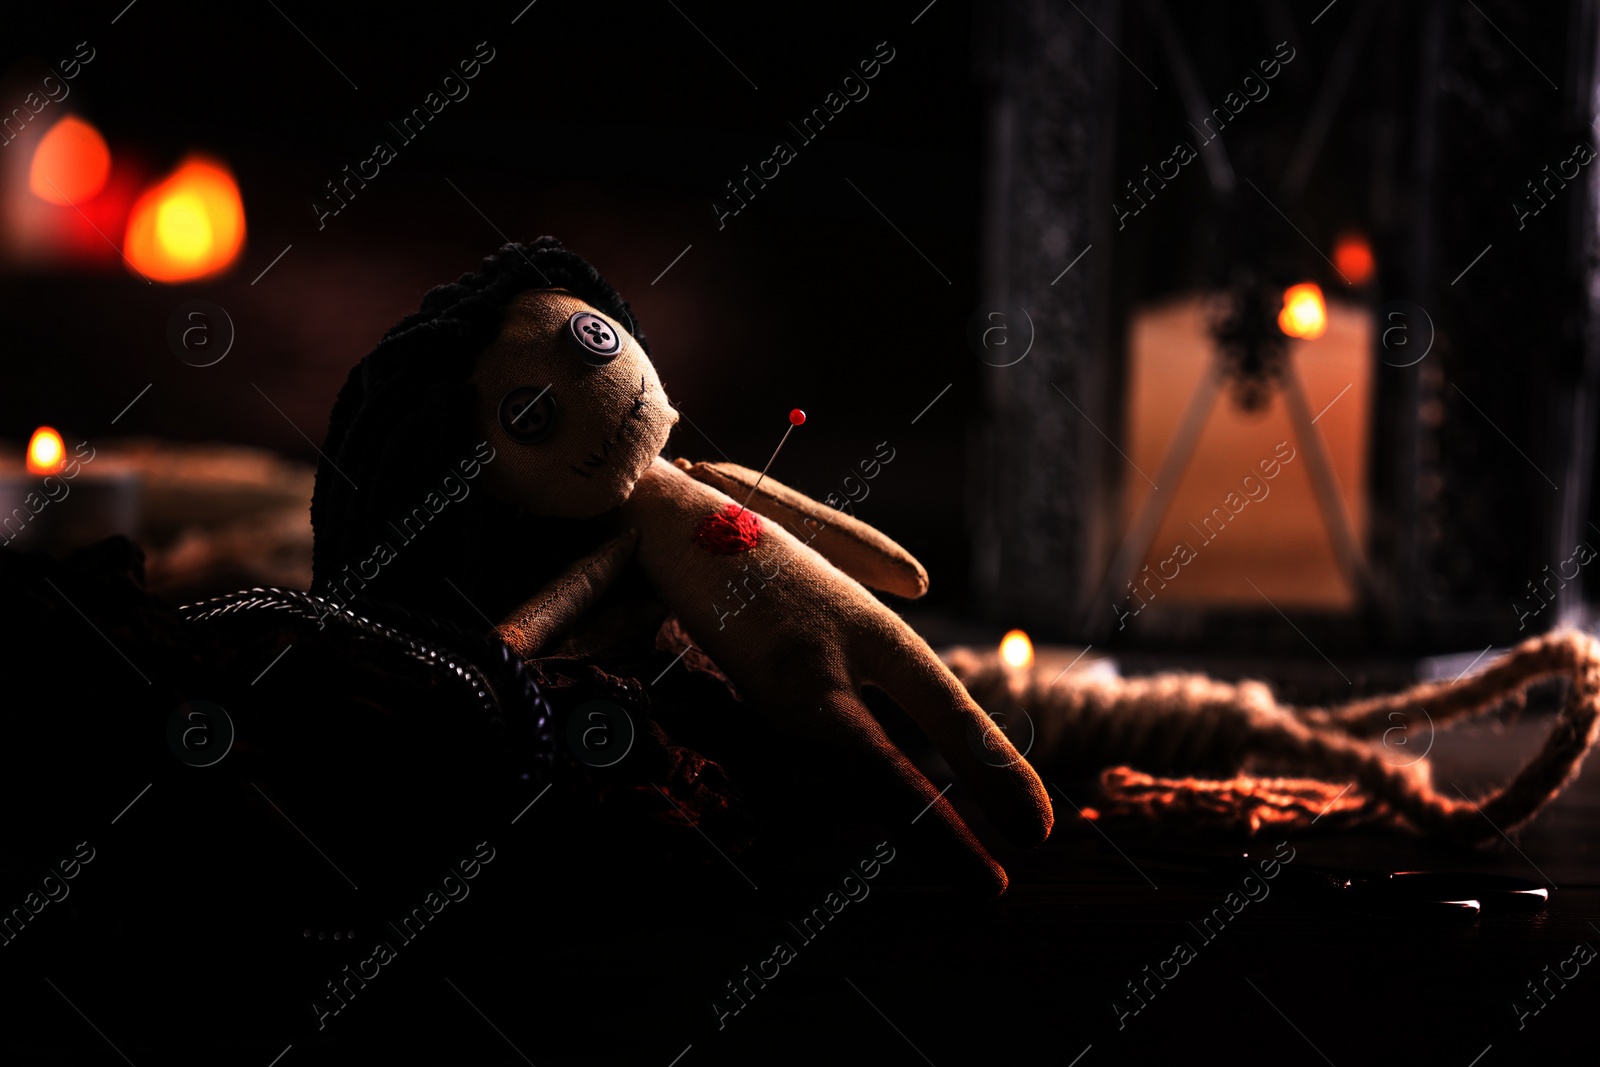 Image of Female voodoo doll with pin in heart and ceremonial items on table